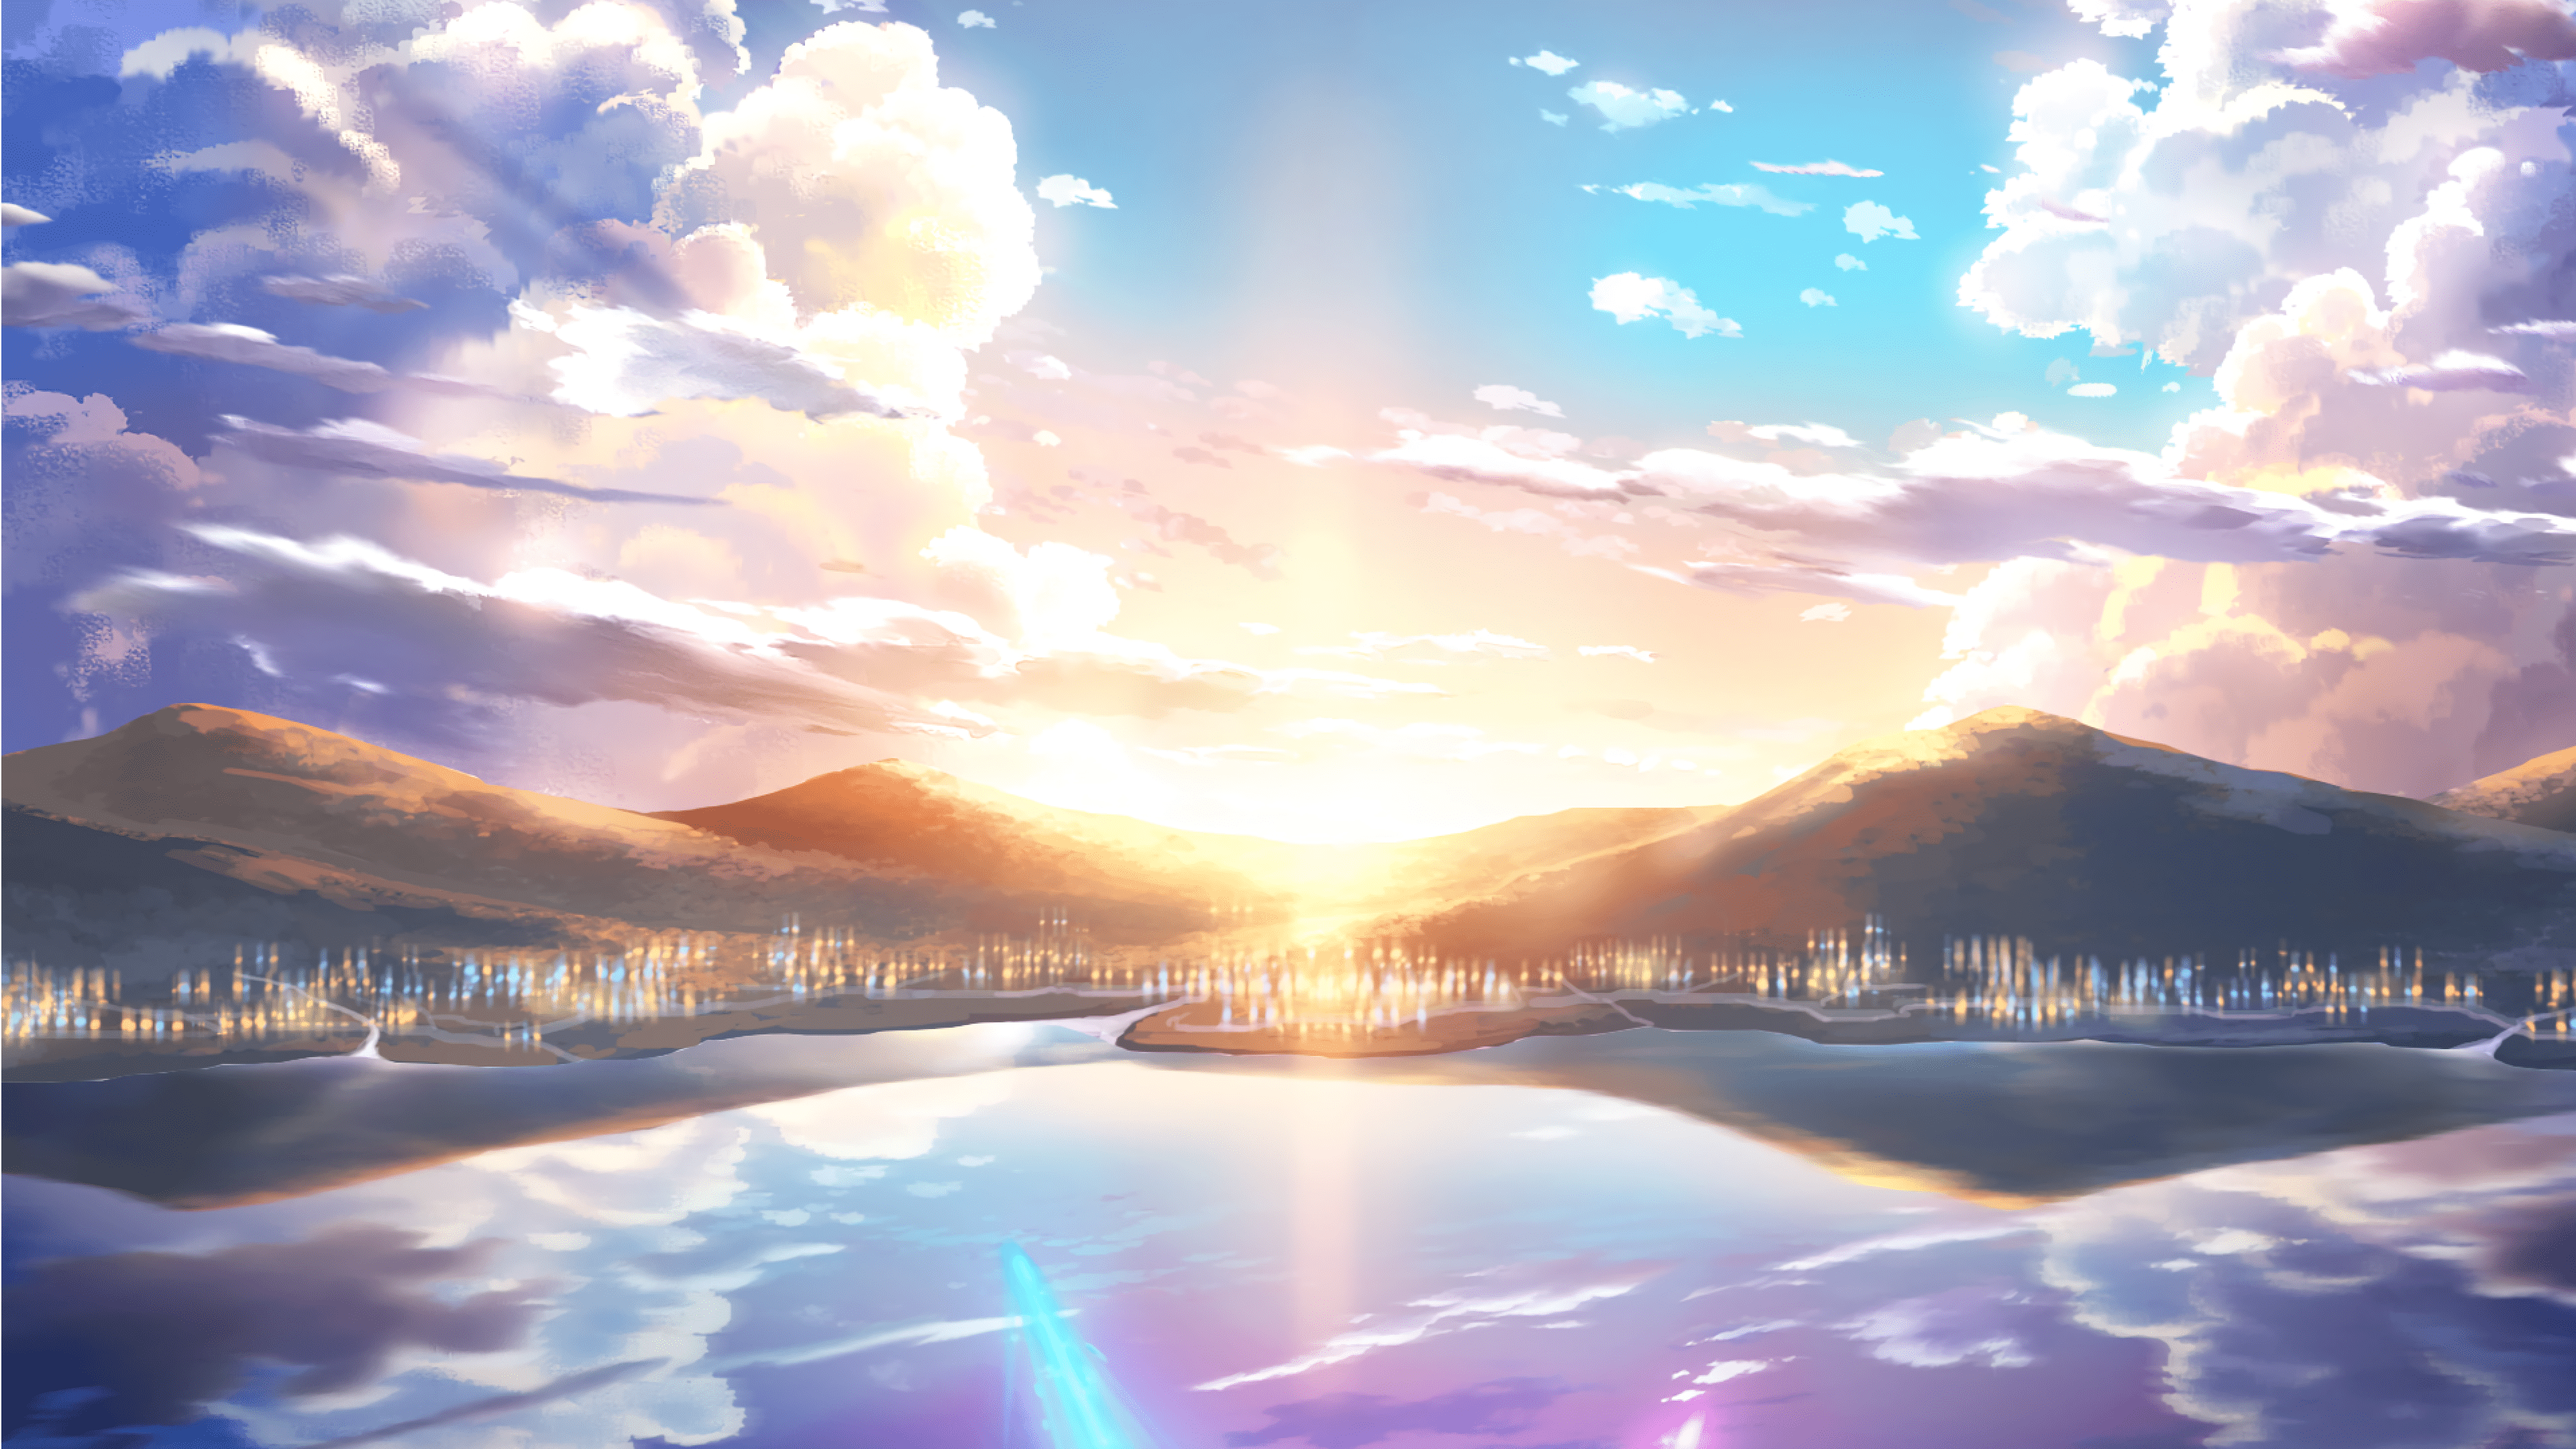 Your Name Wallpaper 4K - your name 4k ultra hd wallpaper » High quality